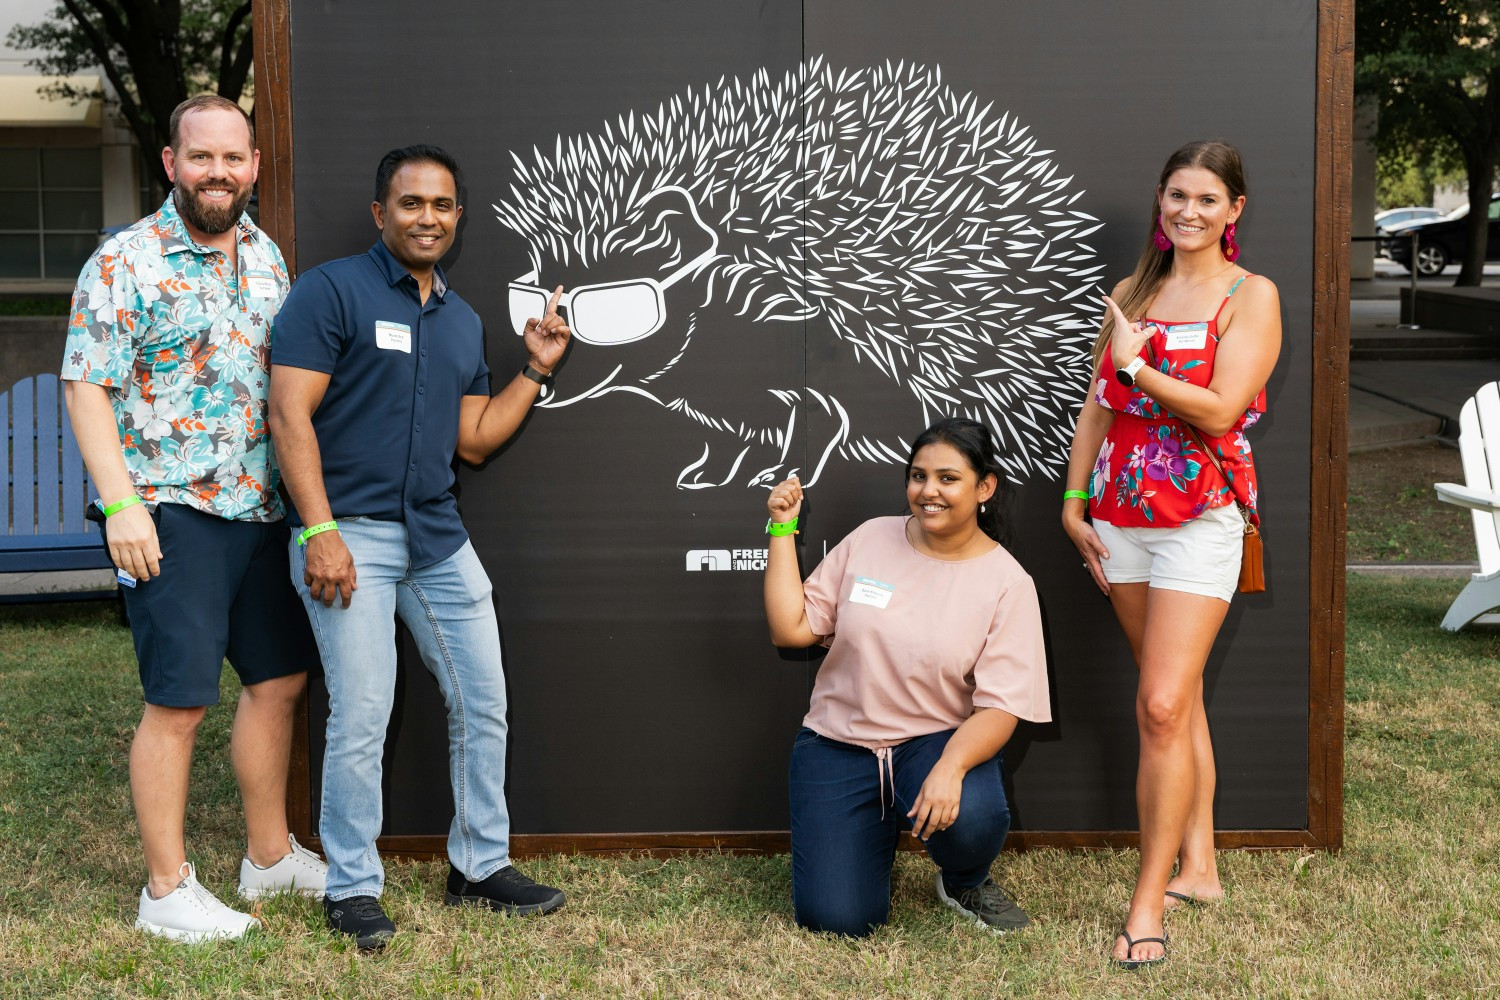 A few employees at our Family Reunion enjoying a few laughs with our company hedgehog mascot